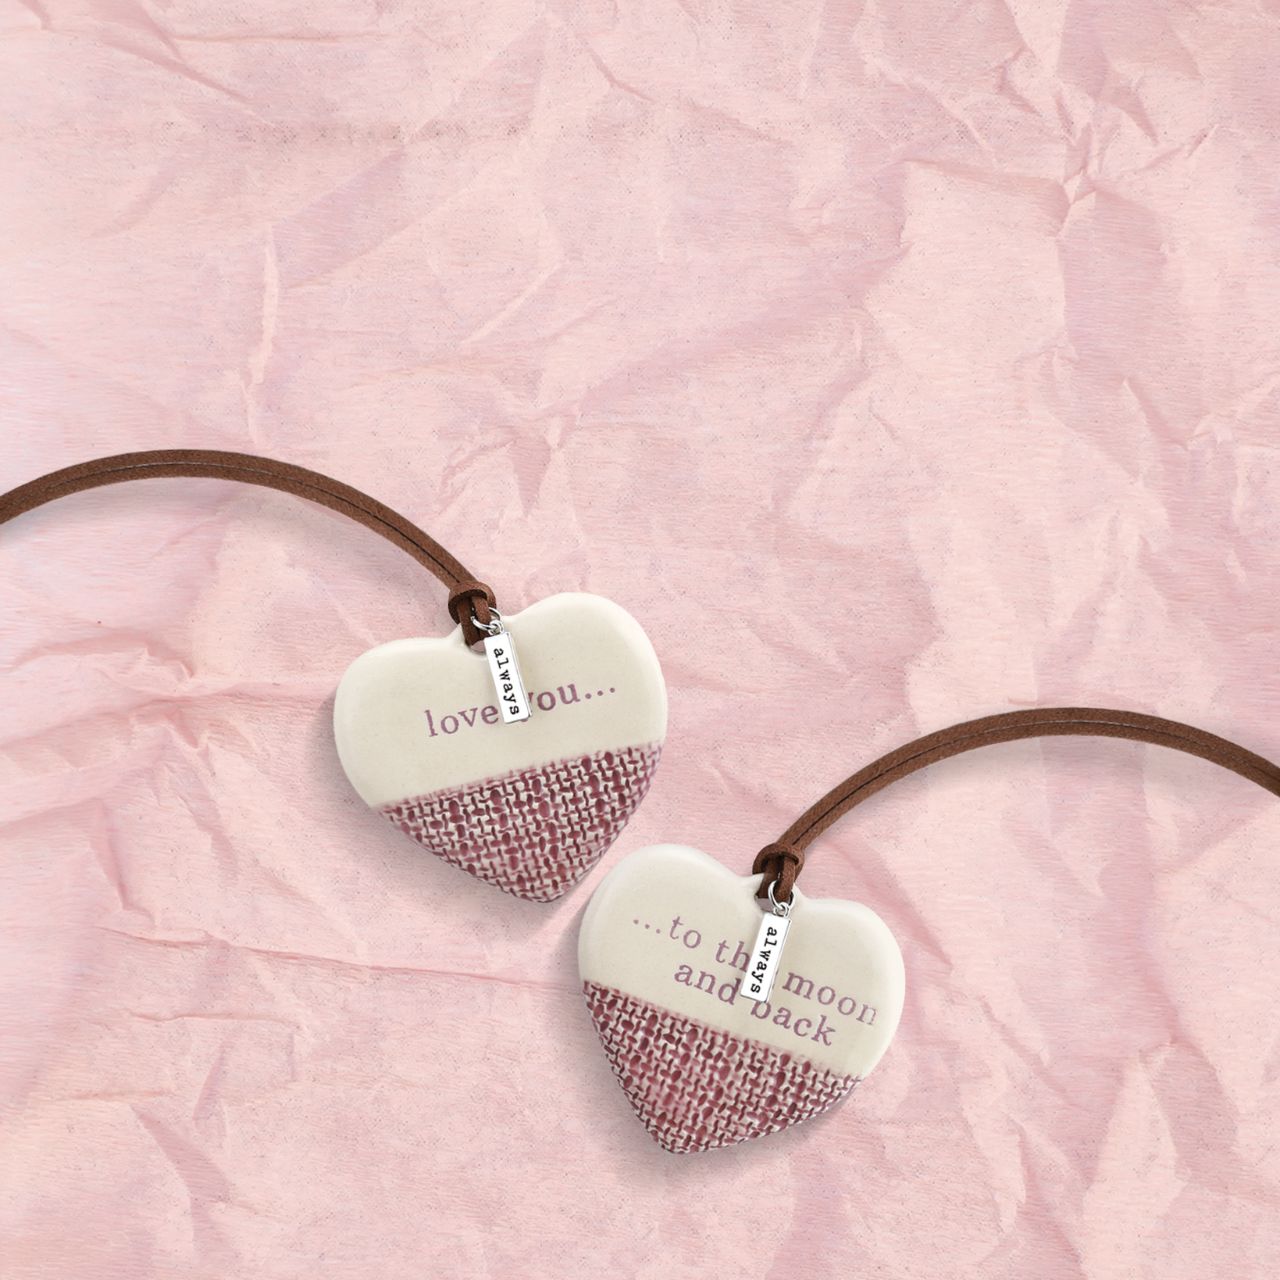 Love One to Keep One to Share Hanging Ornament  Mark and celebrate the special moments in your life with our Love One to Keep, One to Share Ornaments set. These sets remind us of the love between the giver and receiver no matter where they go. Buy one for someone special and pop it in the gift bag and keep one for yourself.